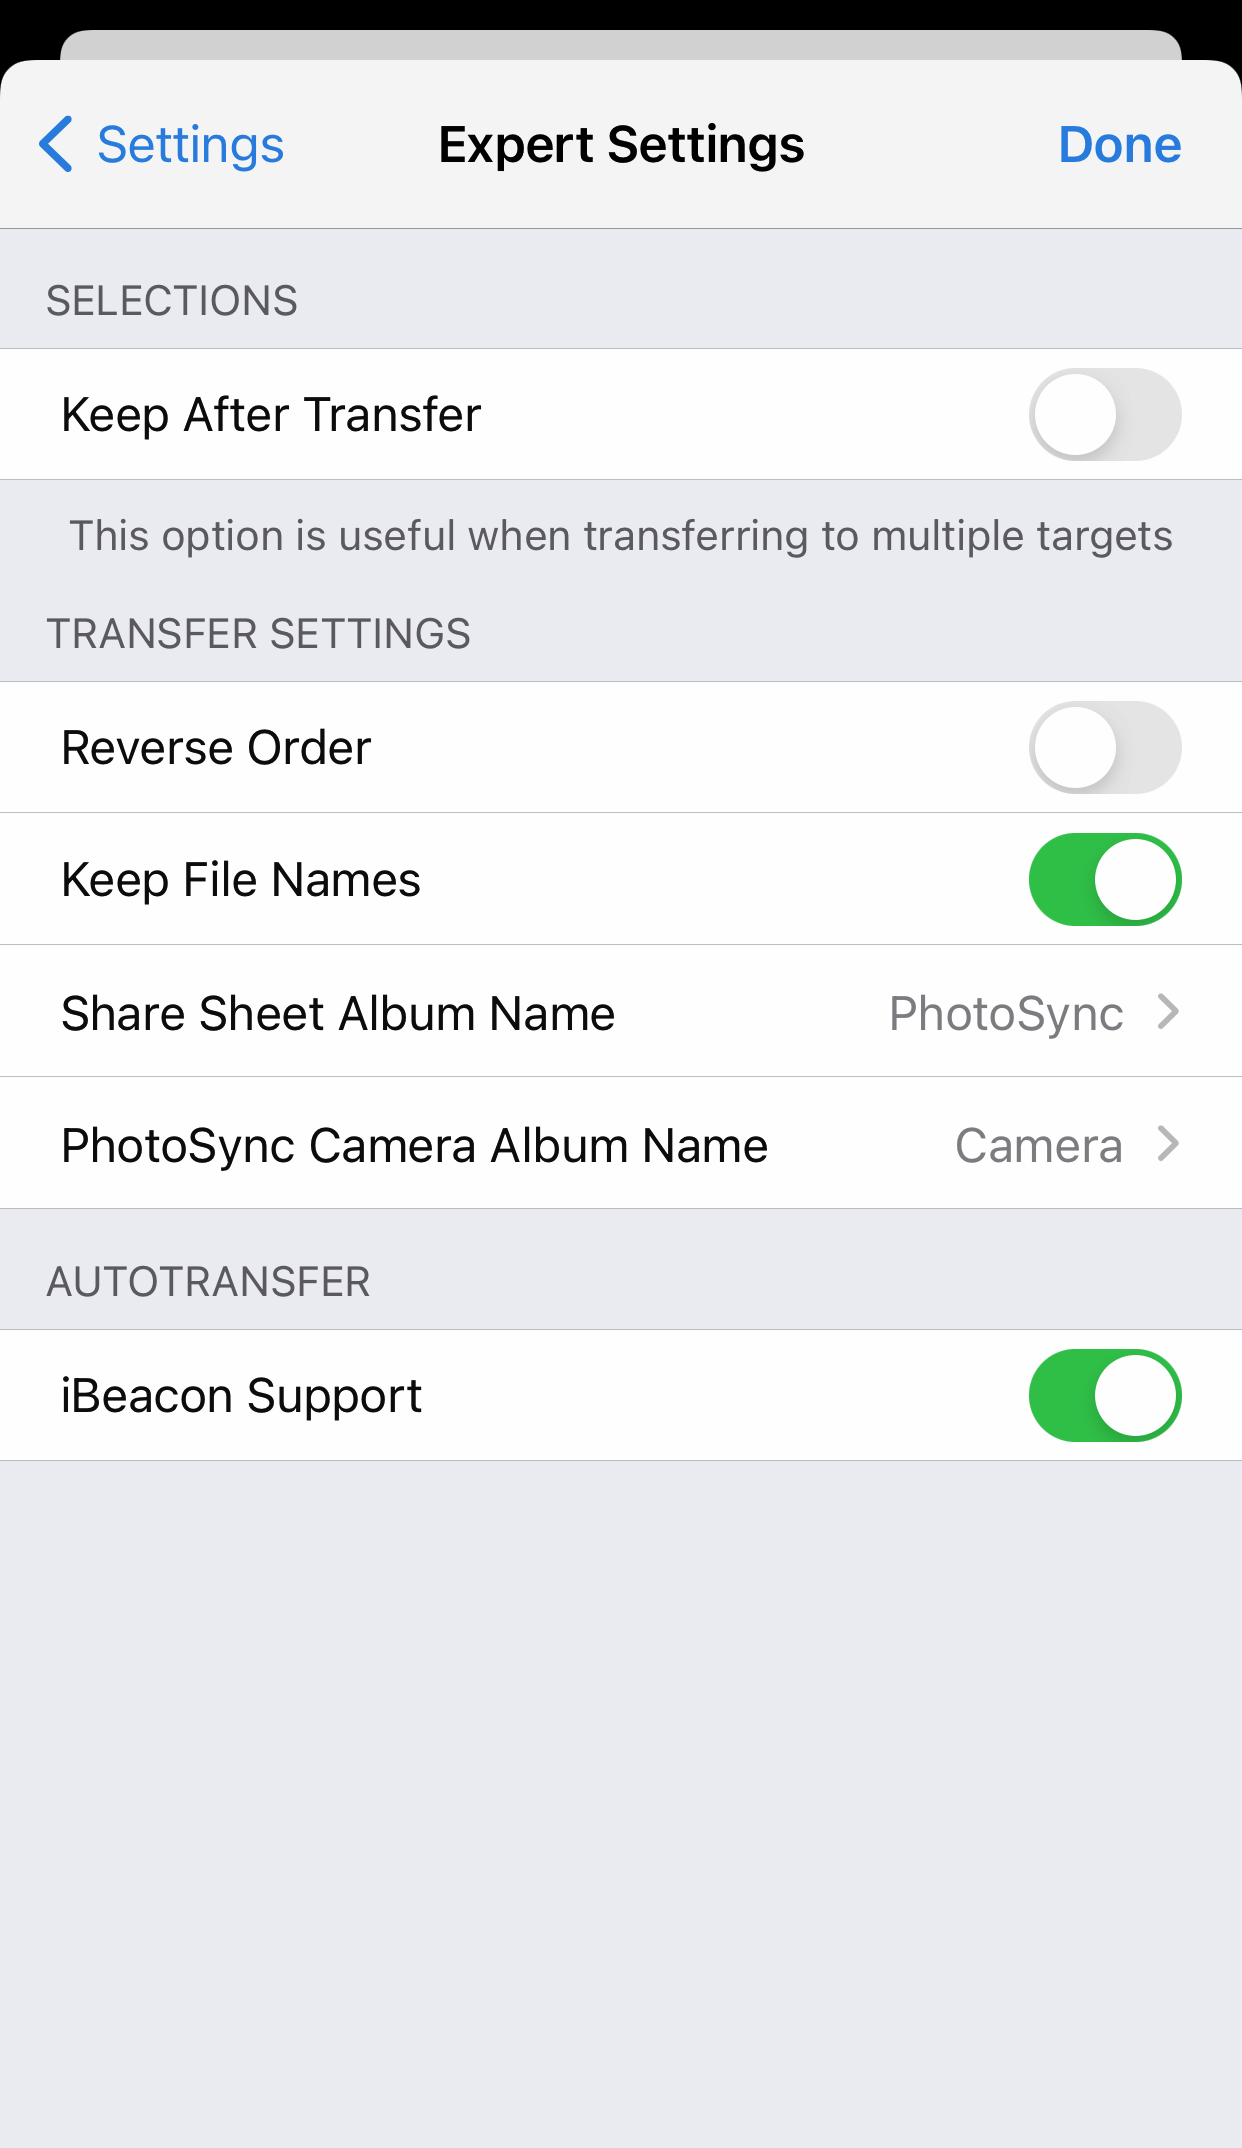 Enable iBeacon support in the expert settings